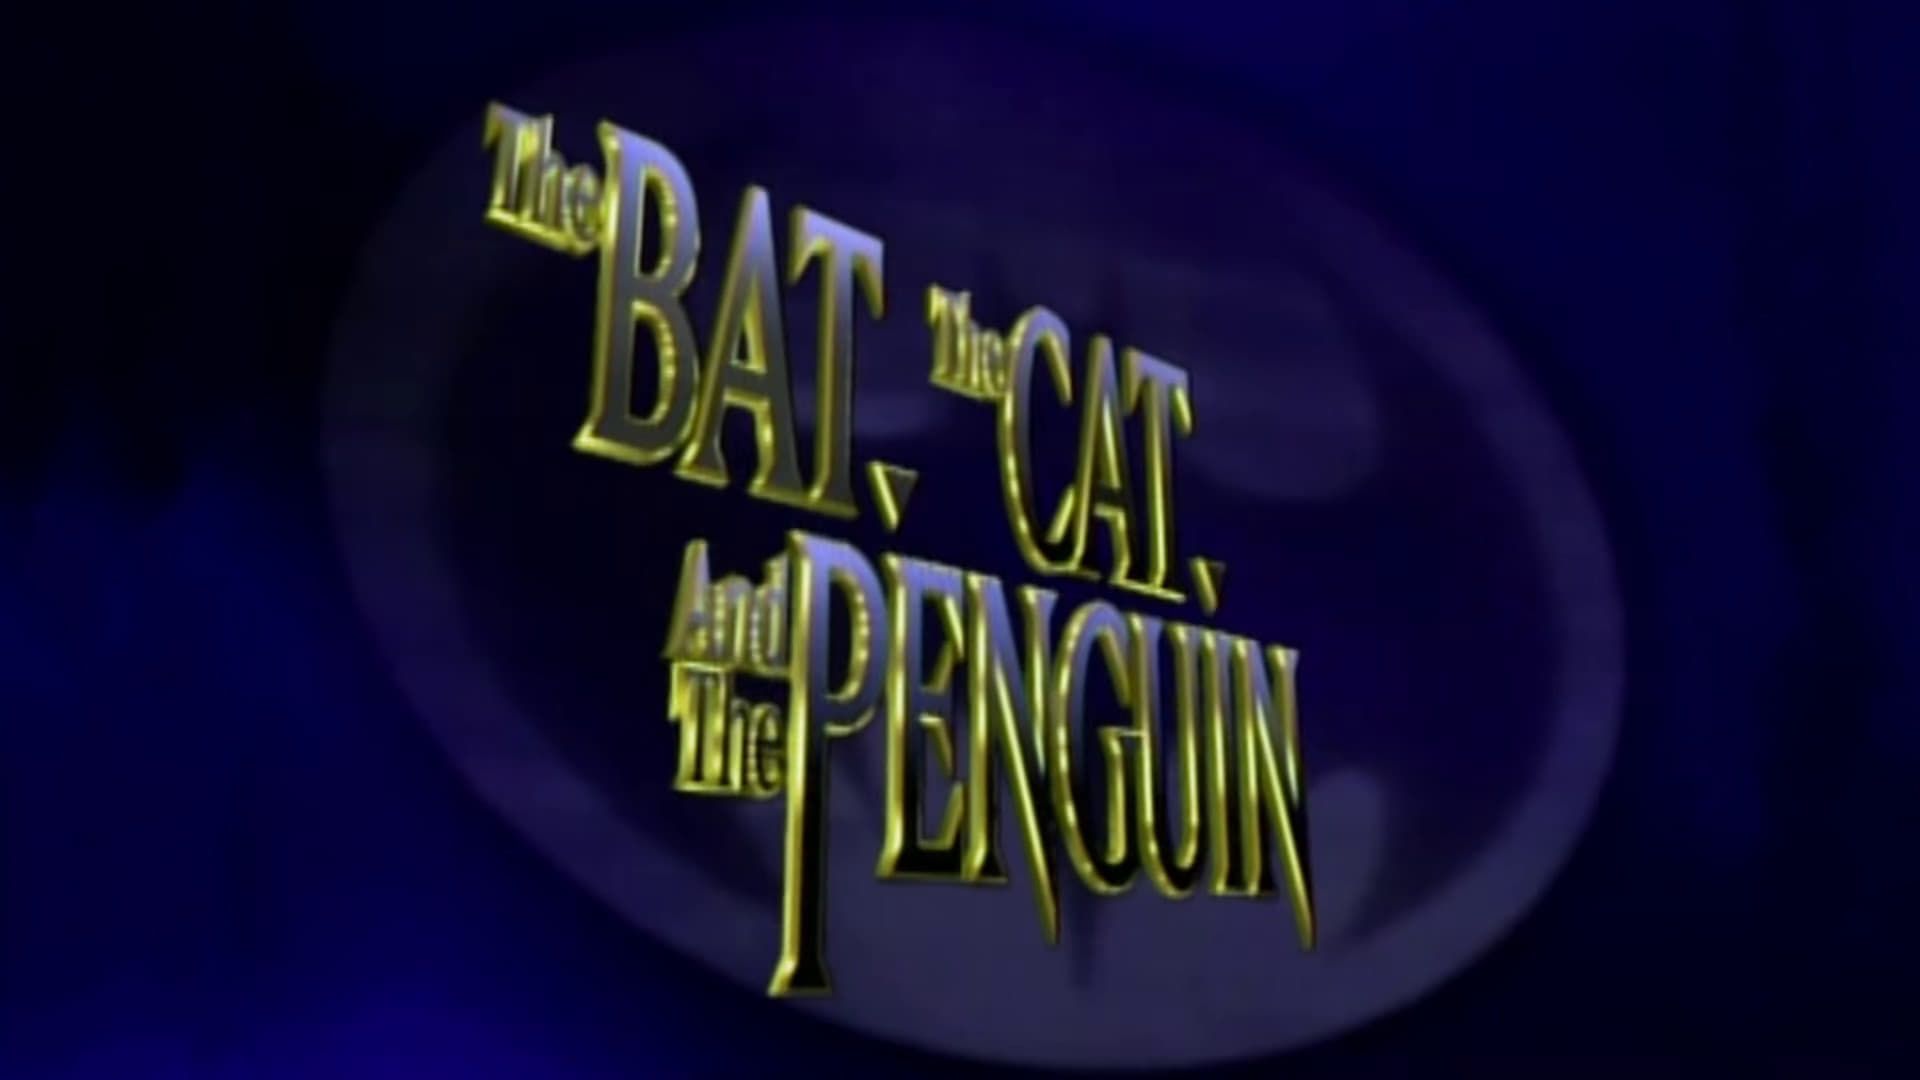 The Bat, the Cat, and the Penguin background